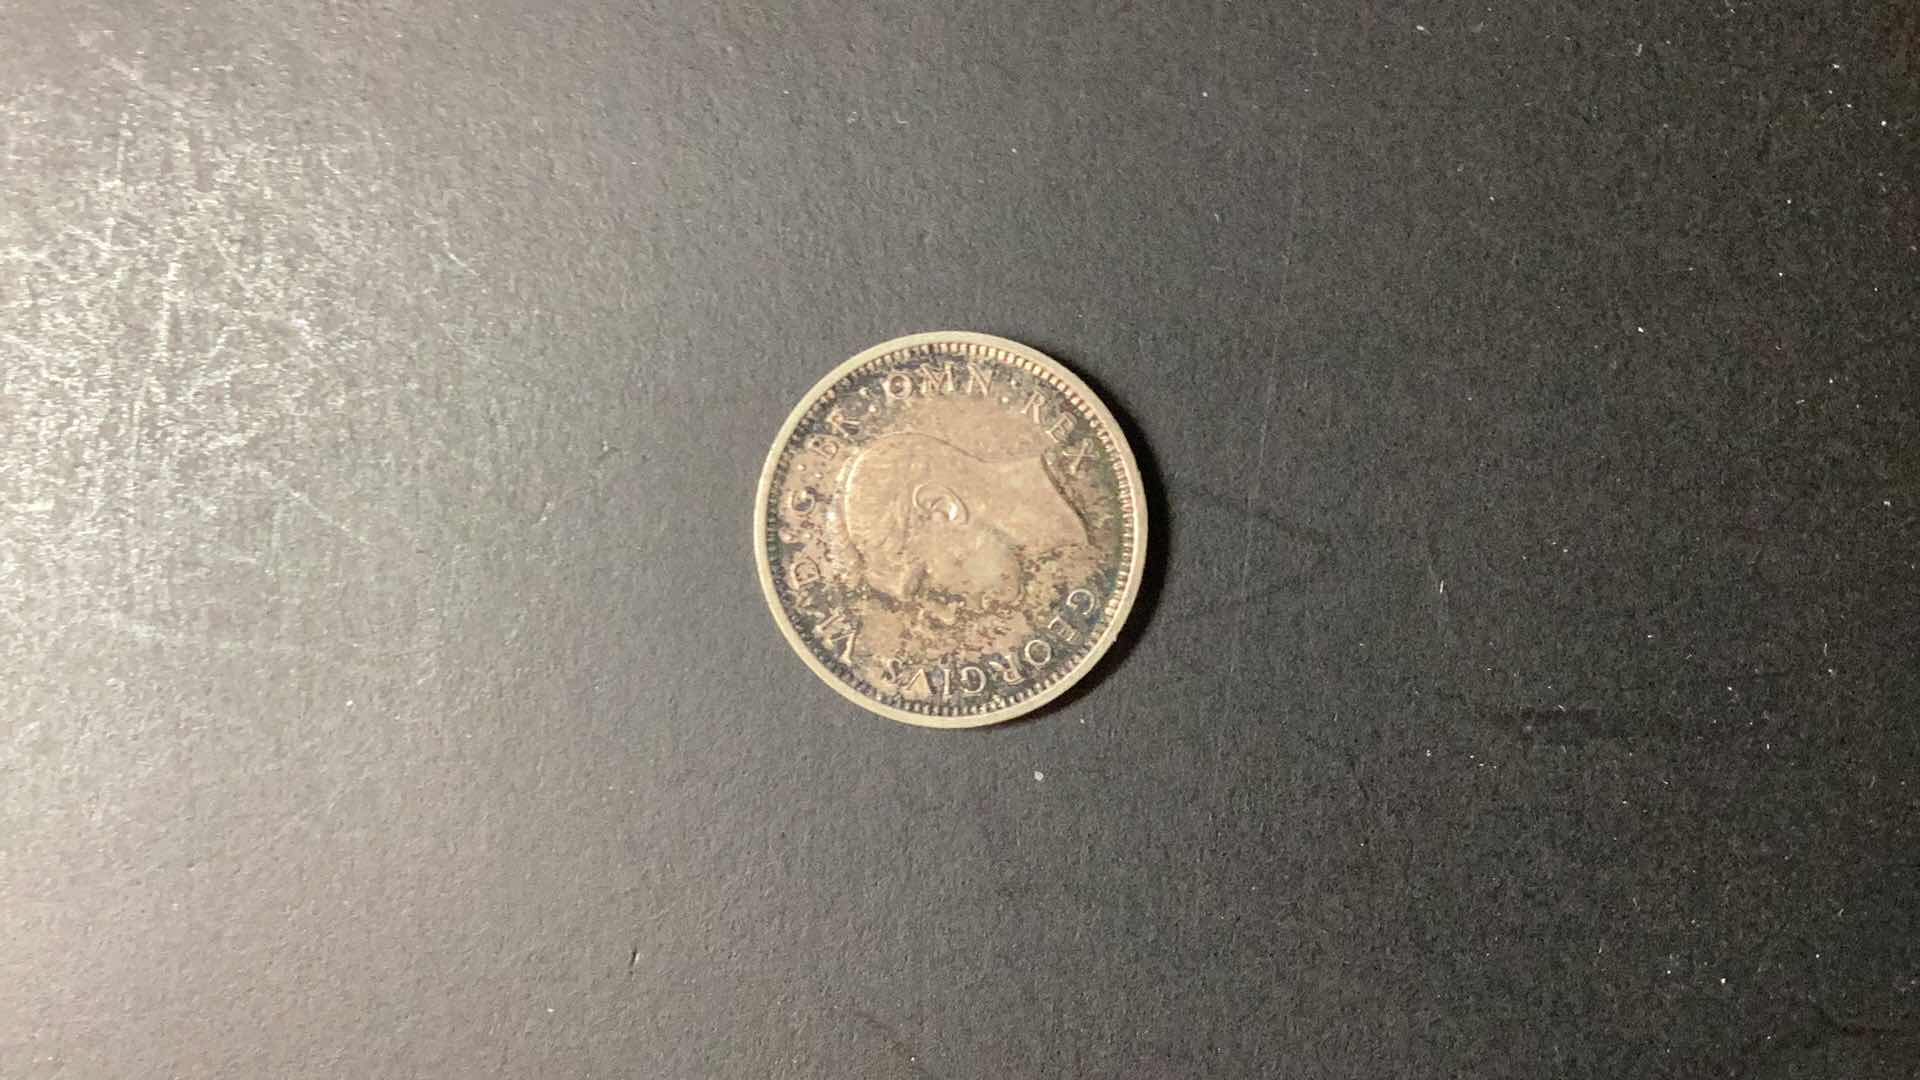 Photo 2 of GREAT BRITAIN-1941 3 PENCE $18